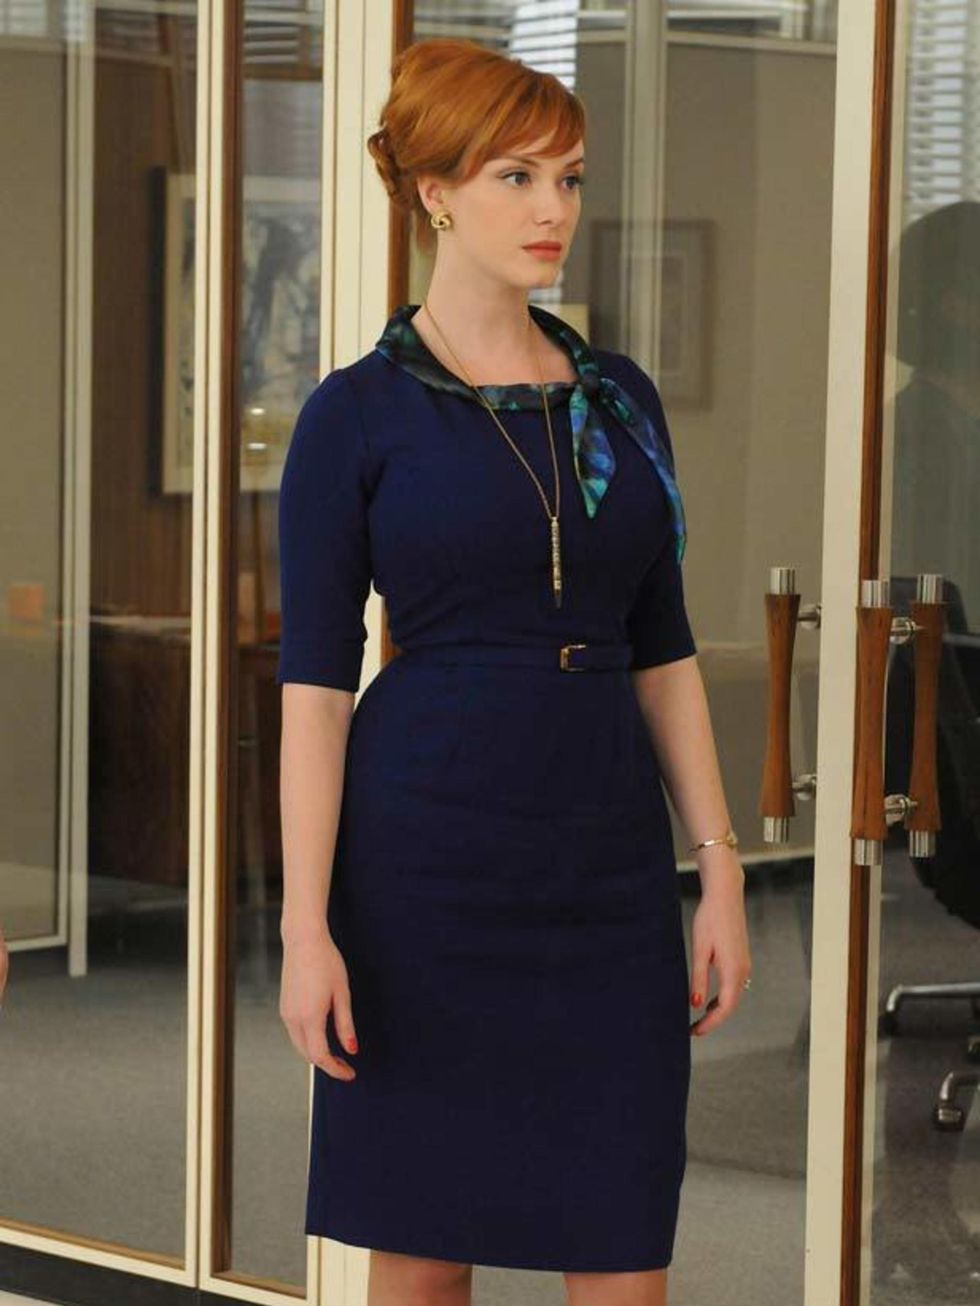 <p><a href="http://www.elleuk.com/content/search?SearchText=christina+hendricks&amp;SearchButton=Search">Christina Hendricks</a> as Joan Harris in a cinched waist dress by costume designer Janie Bryant for the American hit TV show <a href="http://www.elle